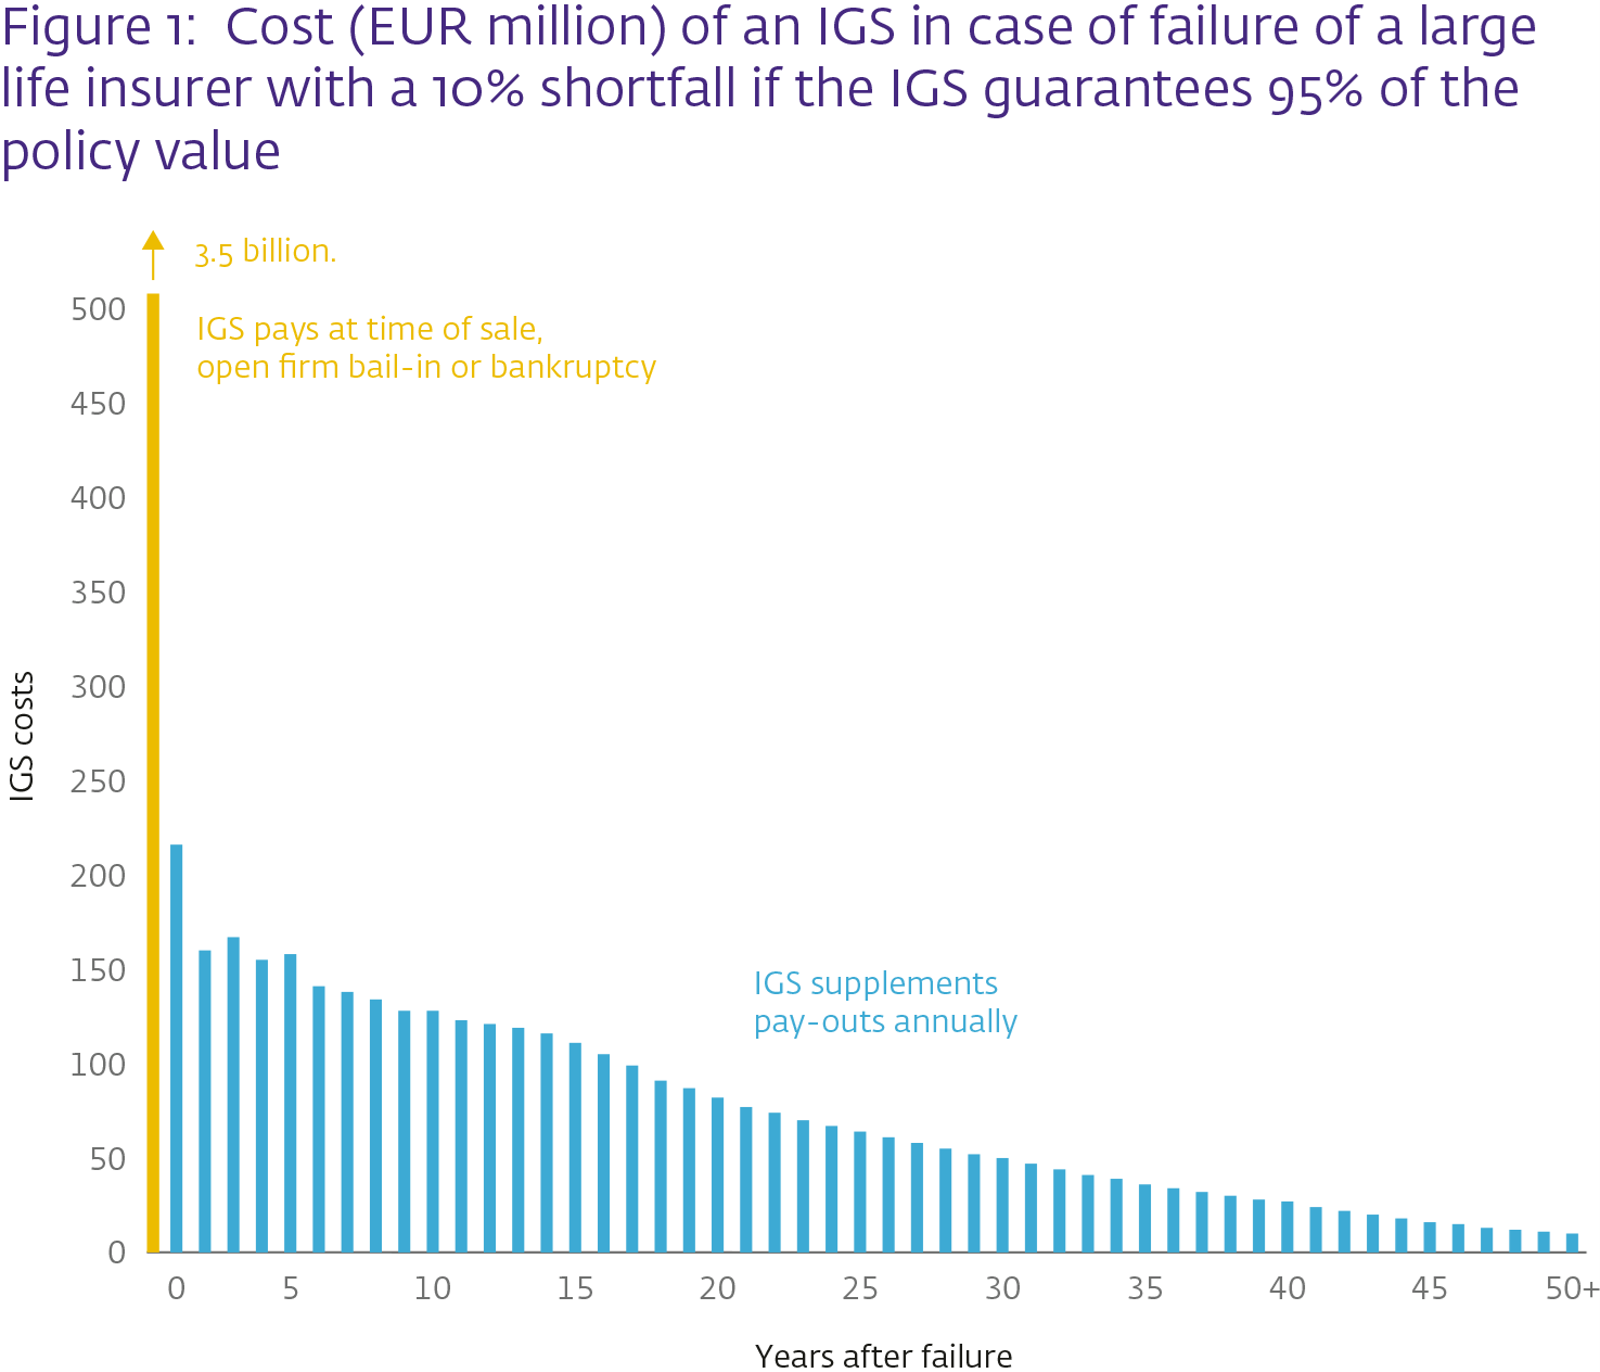 Figure 1: Cost (EUR million) of an IGS in case of failure of a large life insurer with a 10% shortfall if the IGS guarantees 95% of the policy value